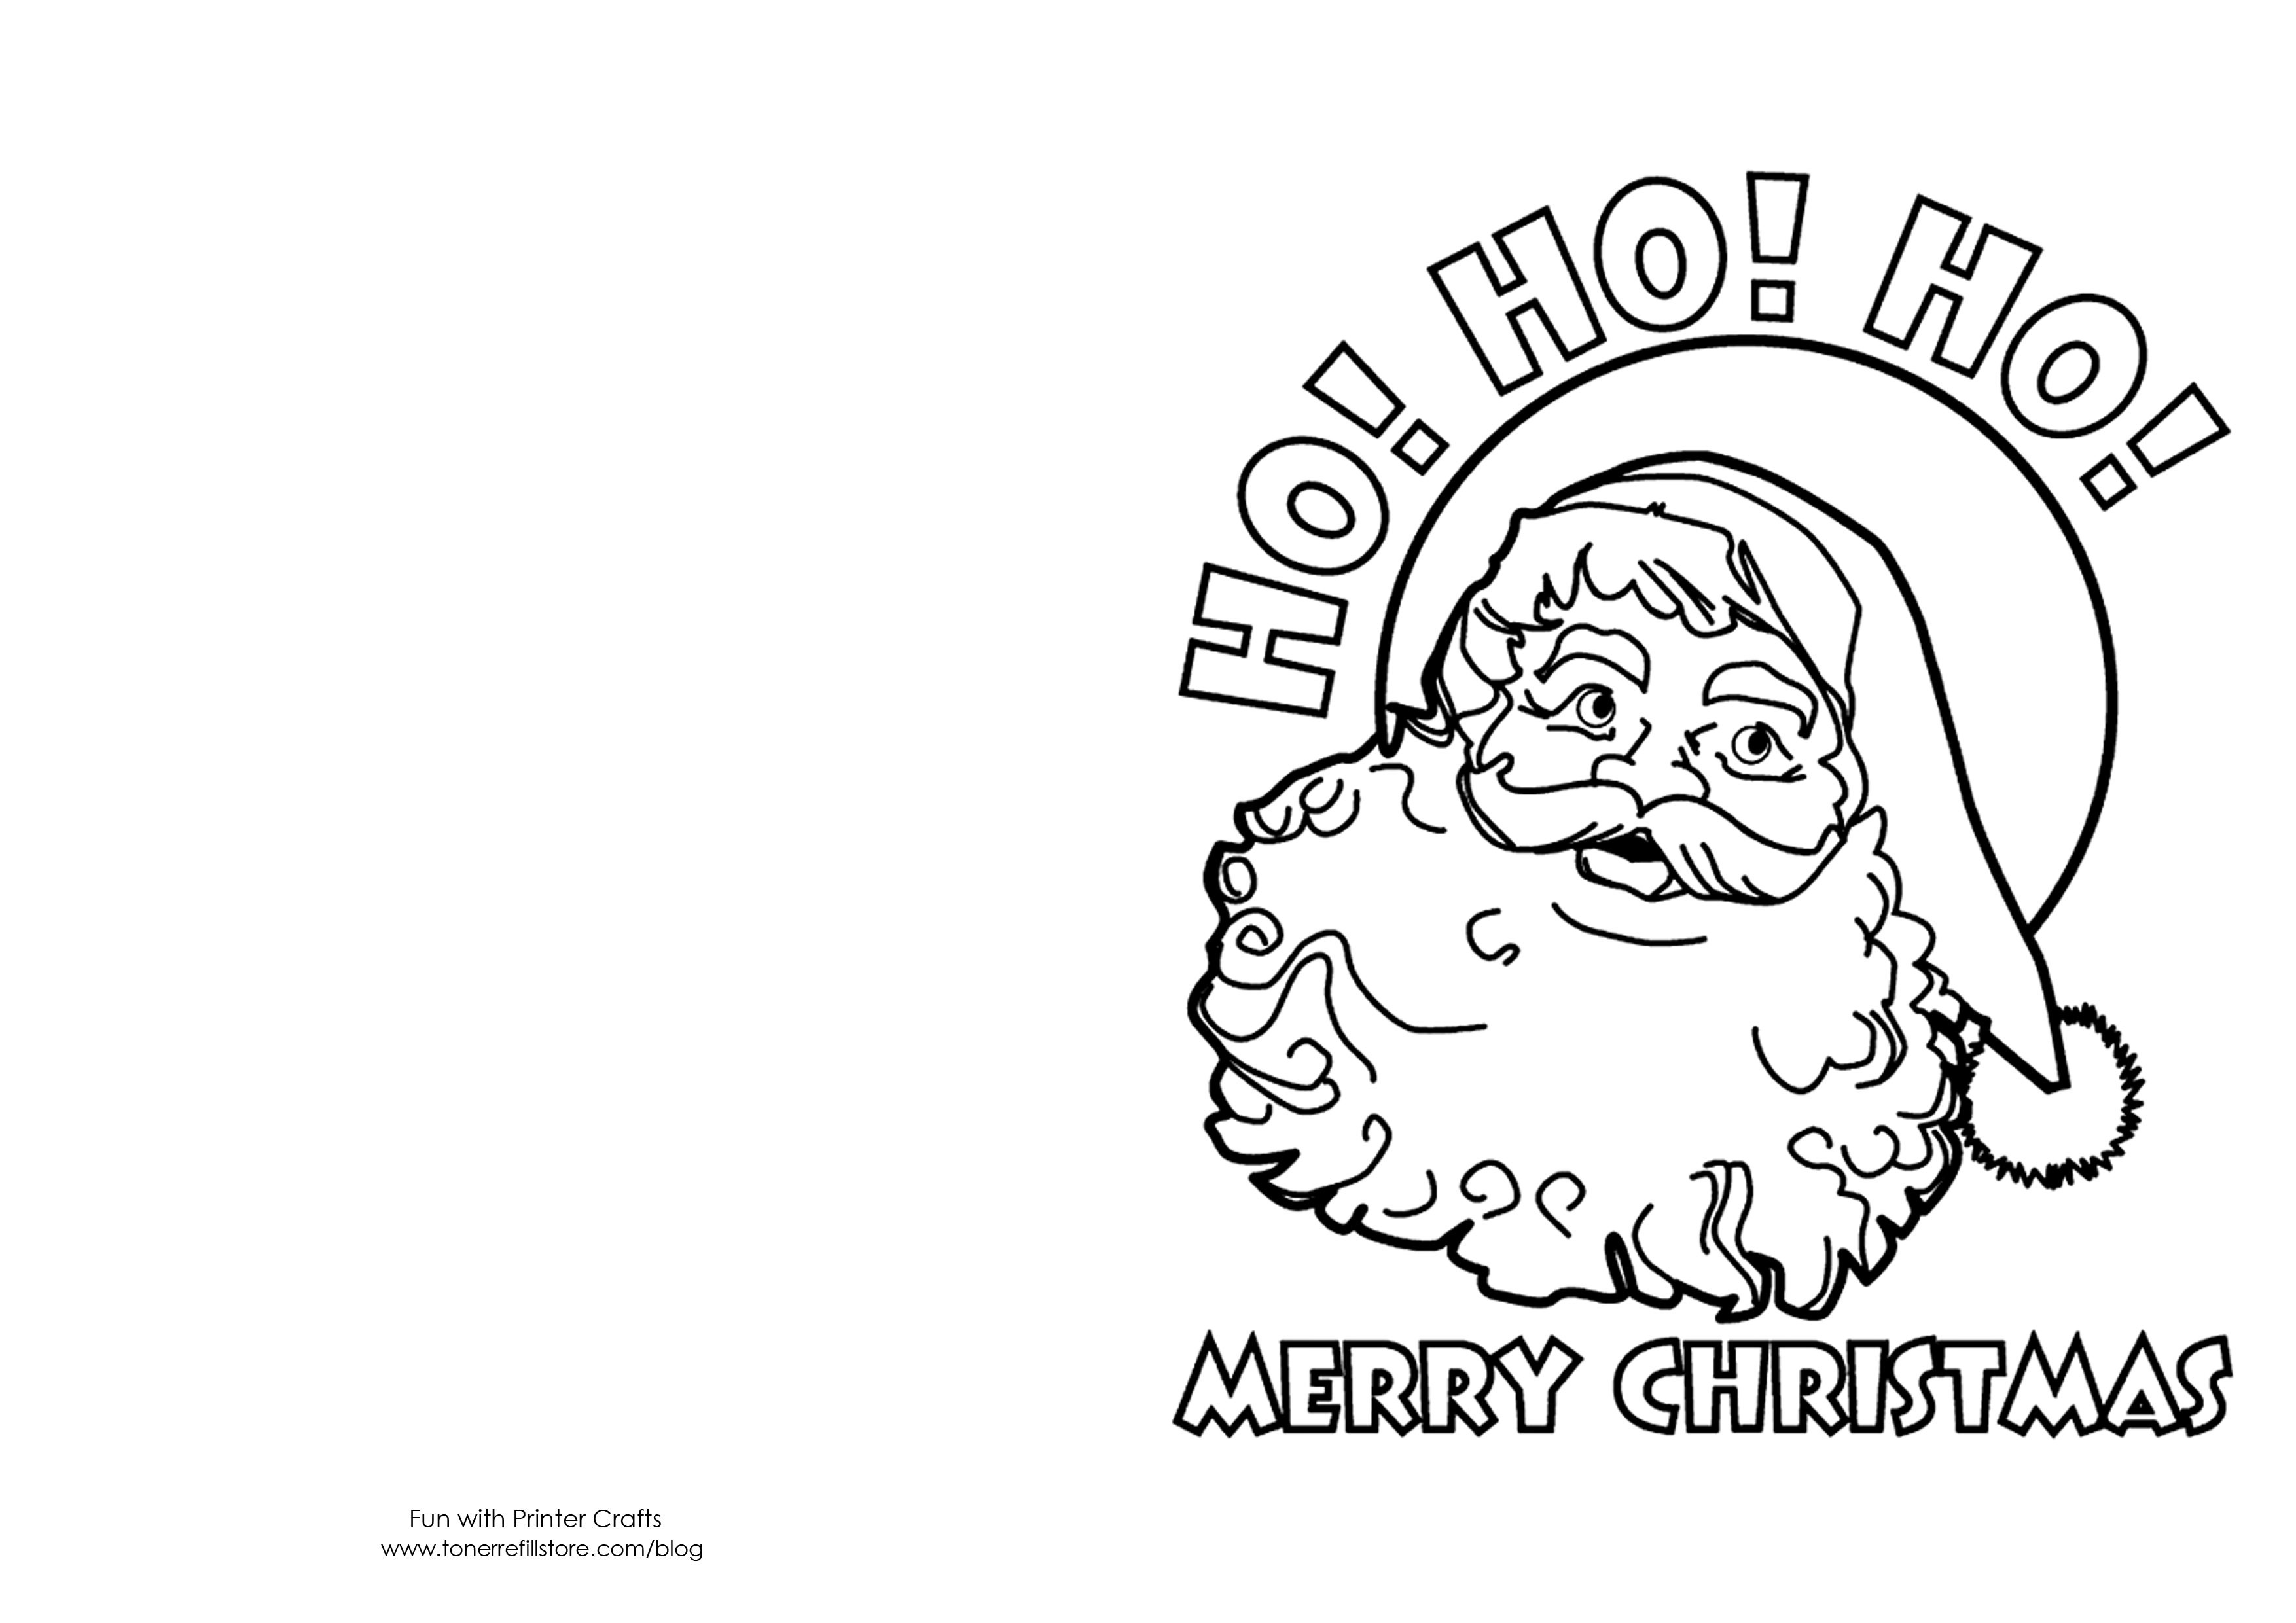 Coloring Pages ~ Coloring Pagesds Diy Christmas Card Idea Cut And - Free Printable Christmas Cards To Color